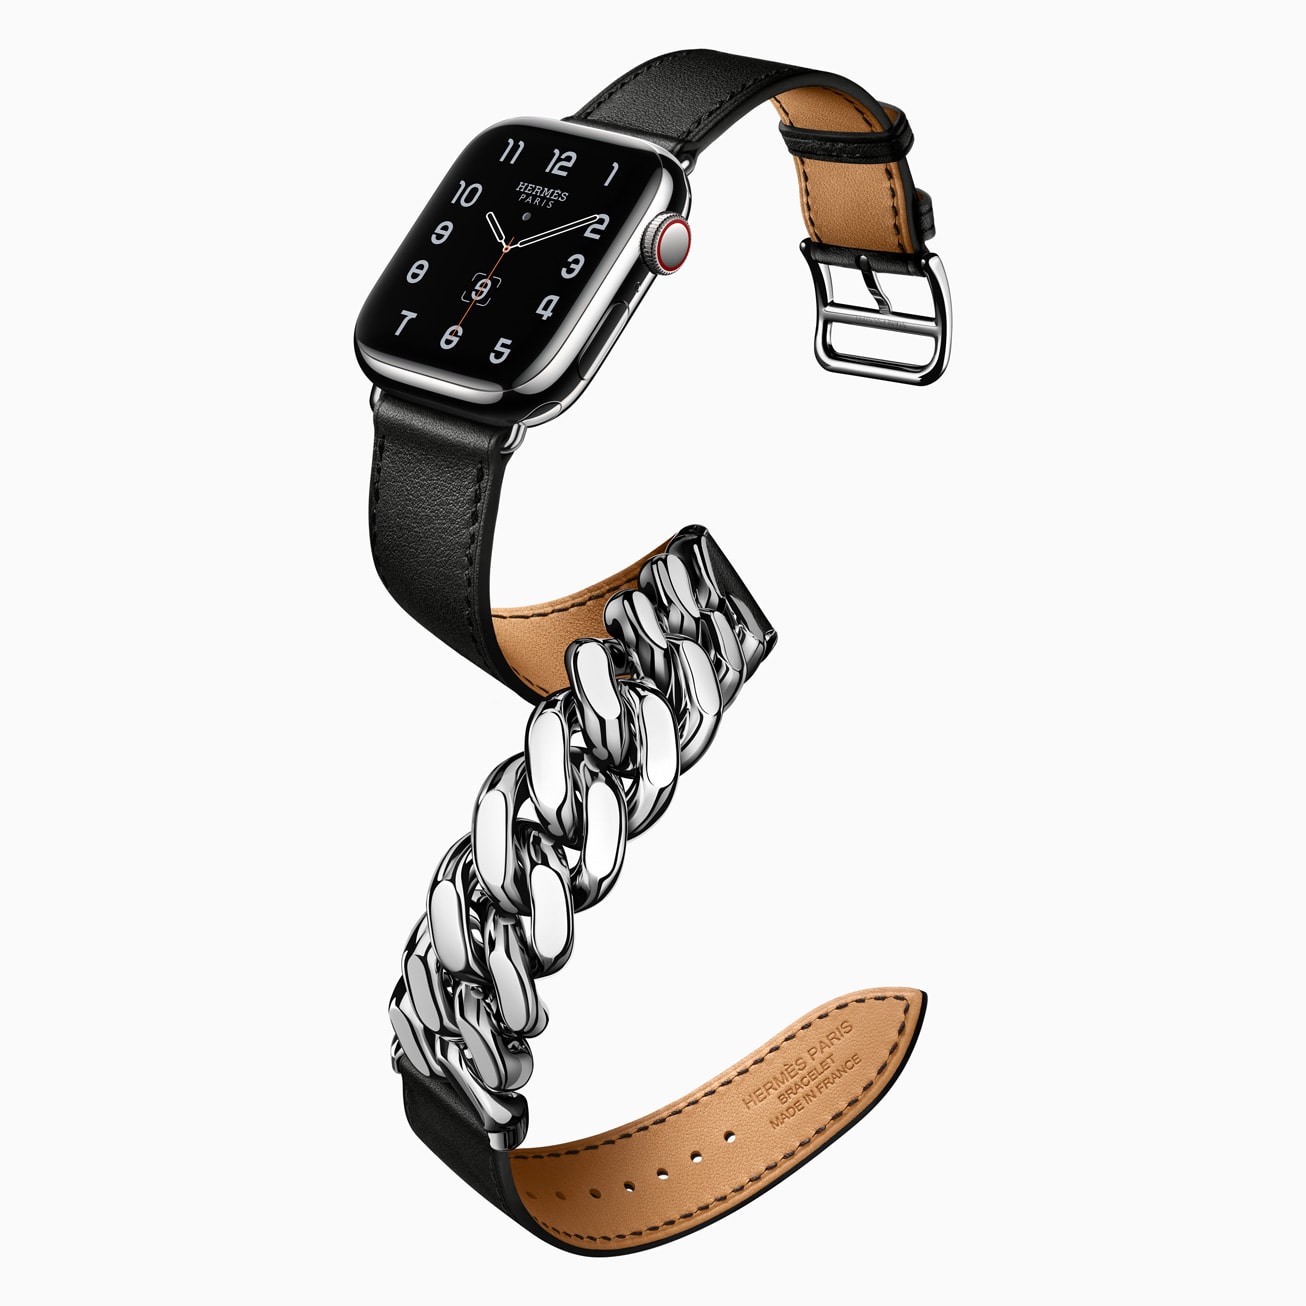 The new Apple Watch Hermès Gourmette Metal band is a stainless steel chain with a noir leather strap that wraps twice around the wrist.